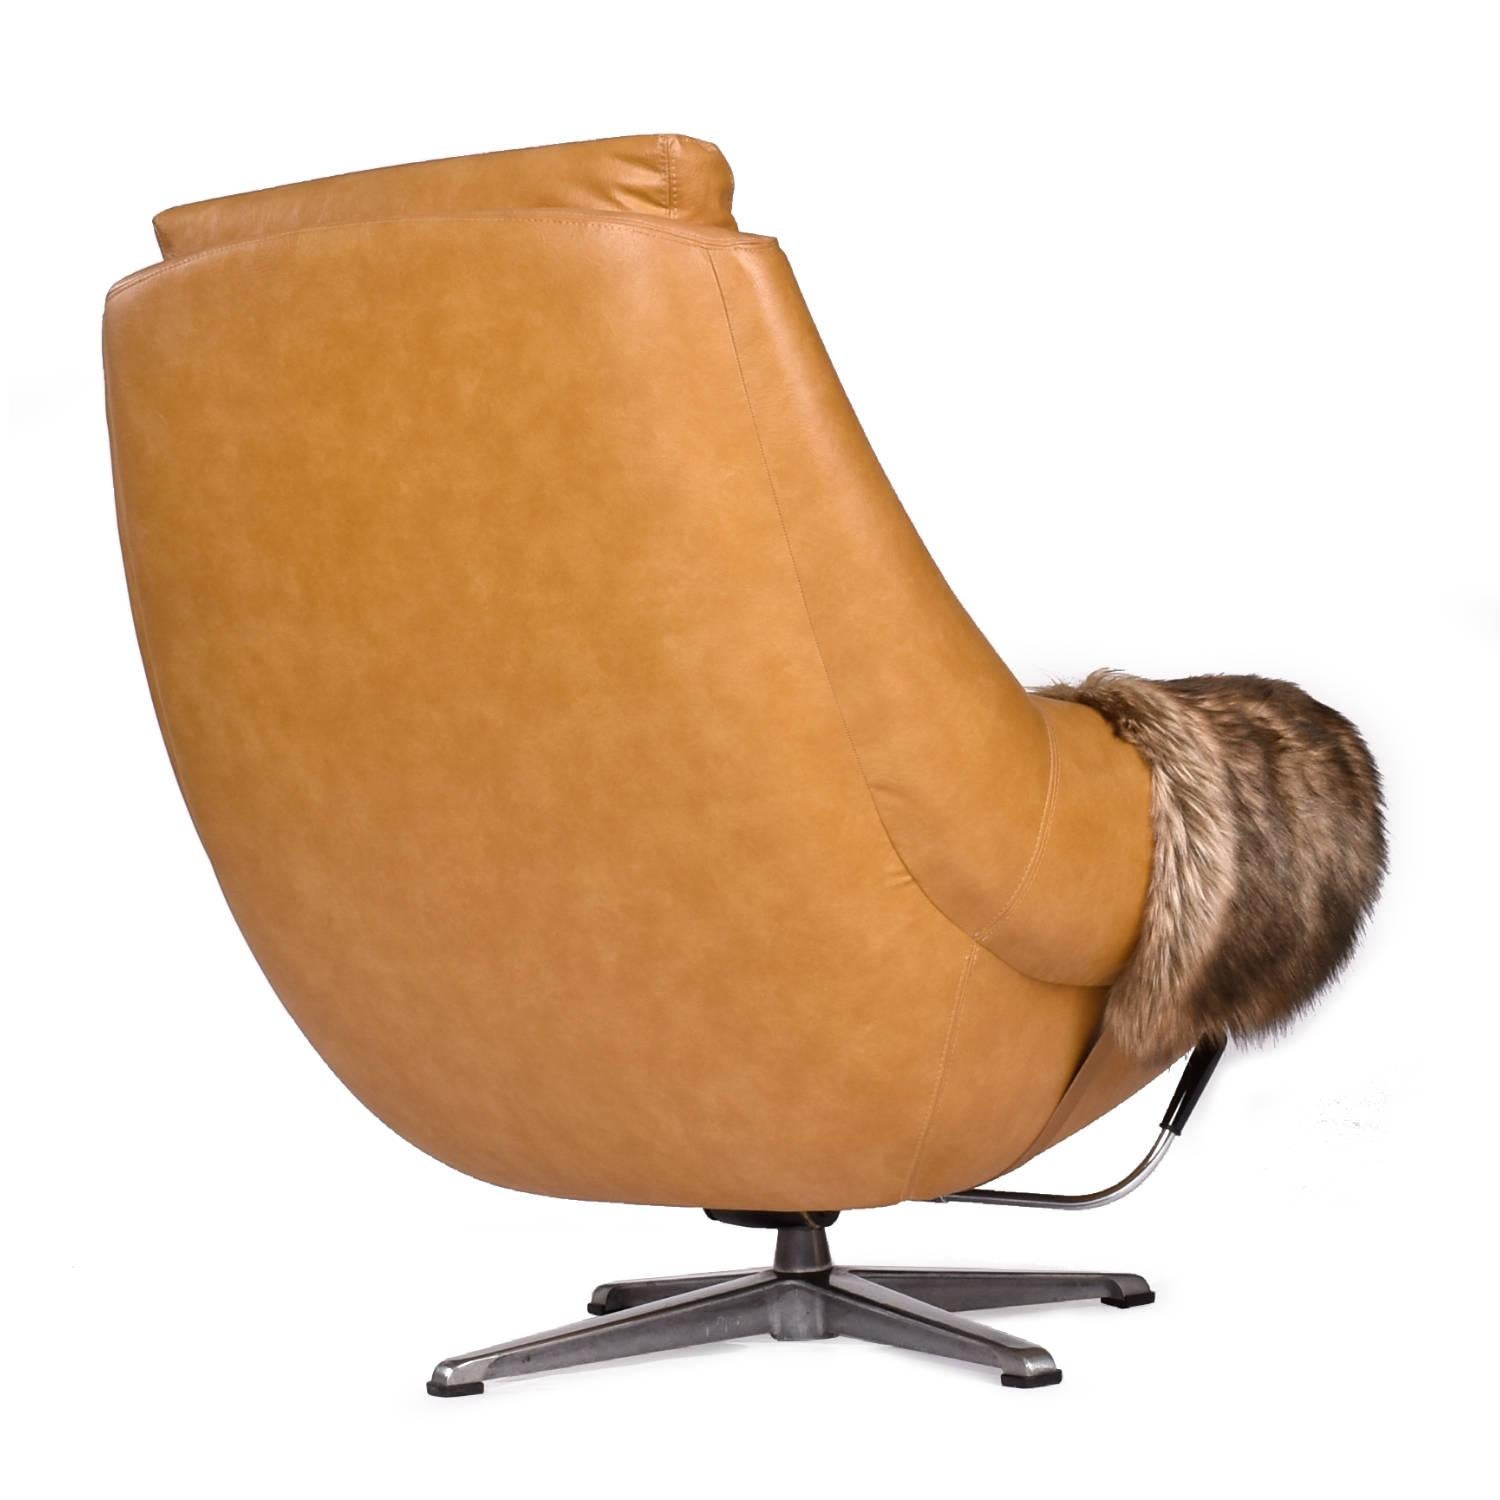 Mid-Century Modern 1970s Swivel Pod Chair Recliner with Faux Fur Arms In Good Condition For Sale In Chattanooga, TN